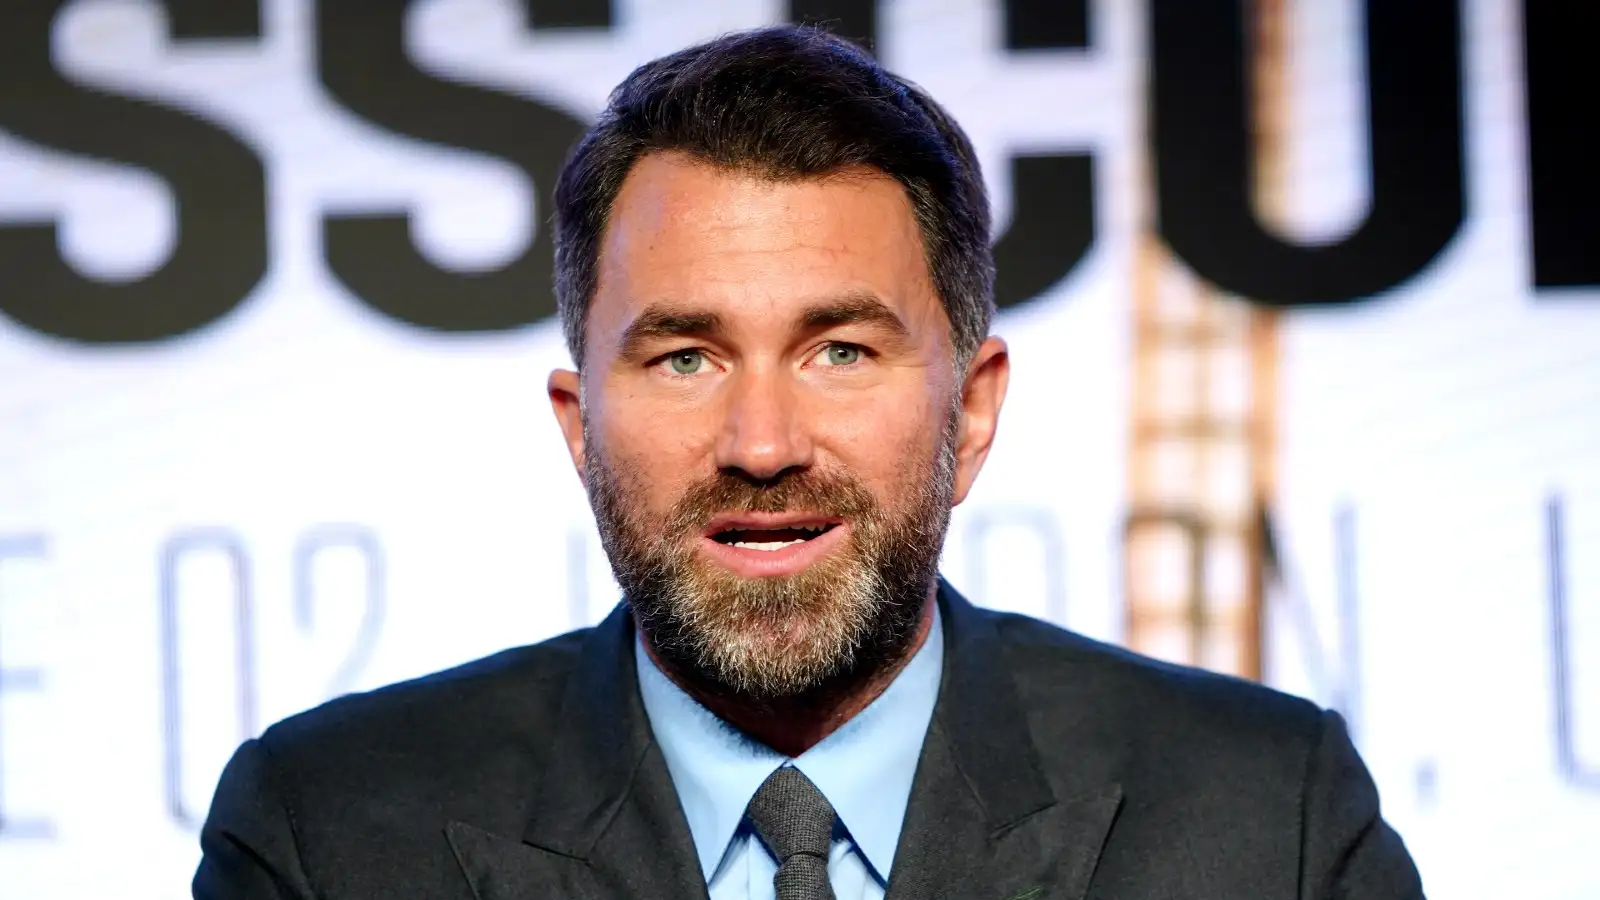 Eddie Hearn lays in to rugby league: bitter or does he have a point?